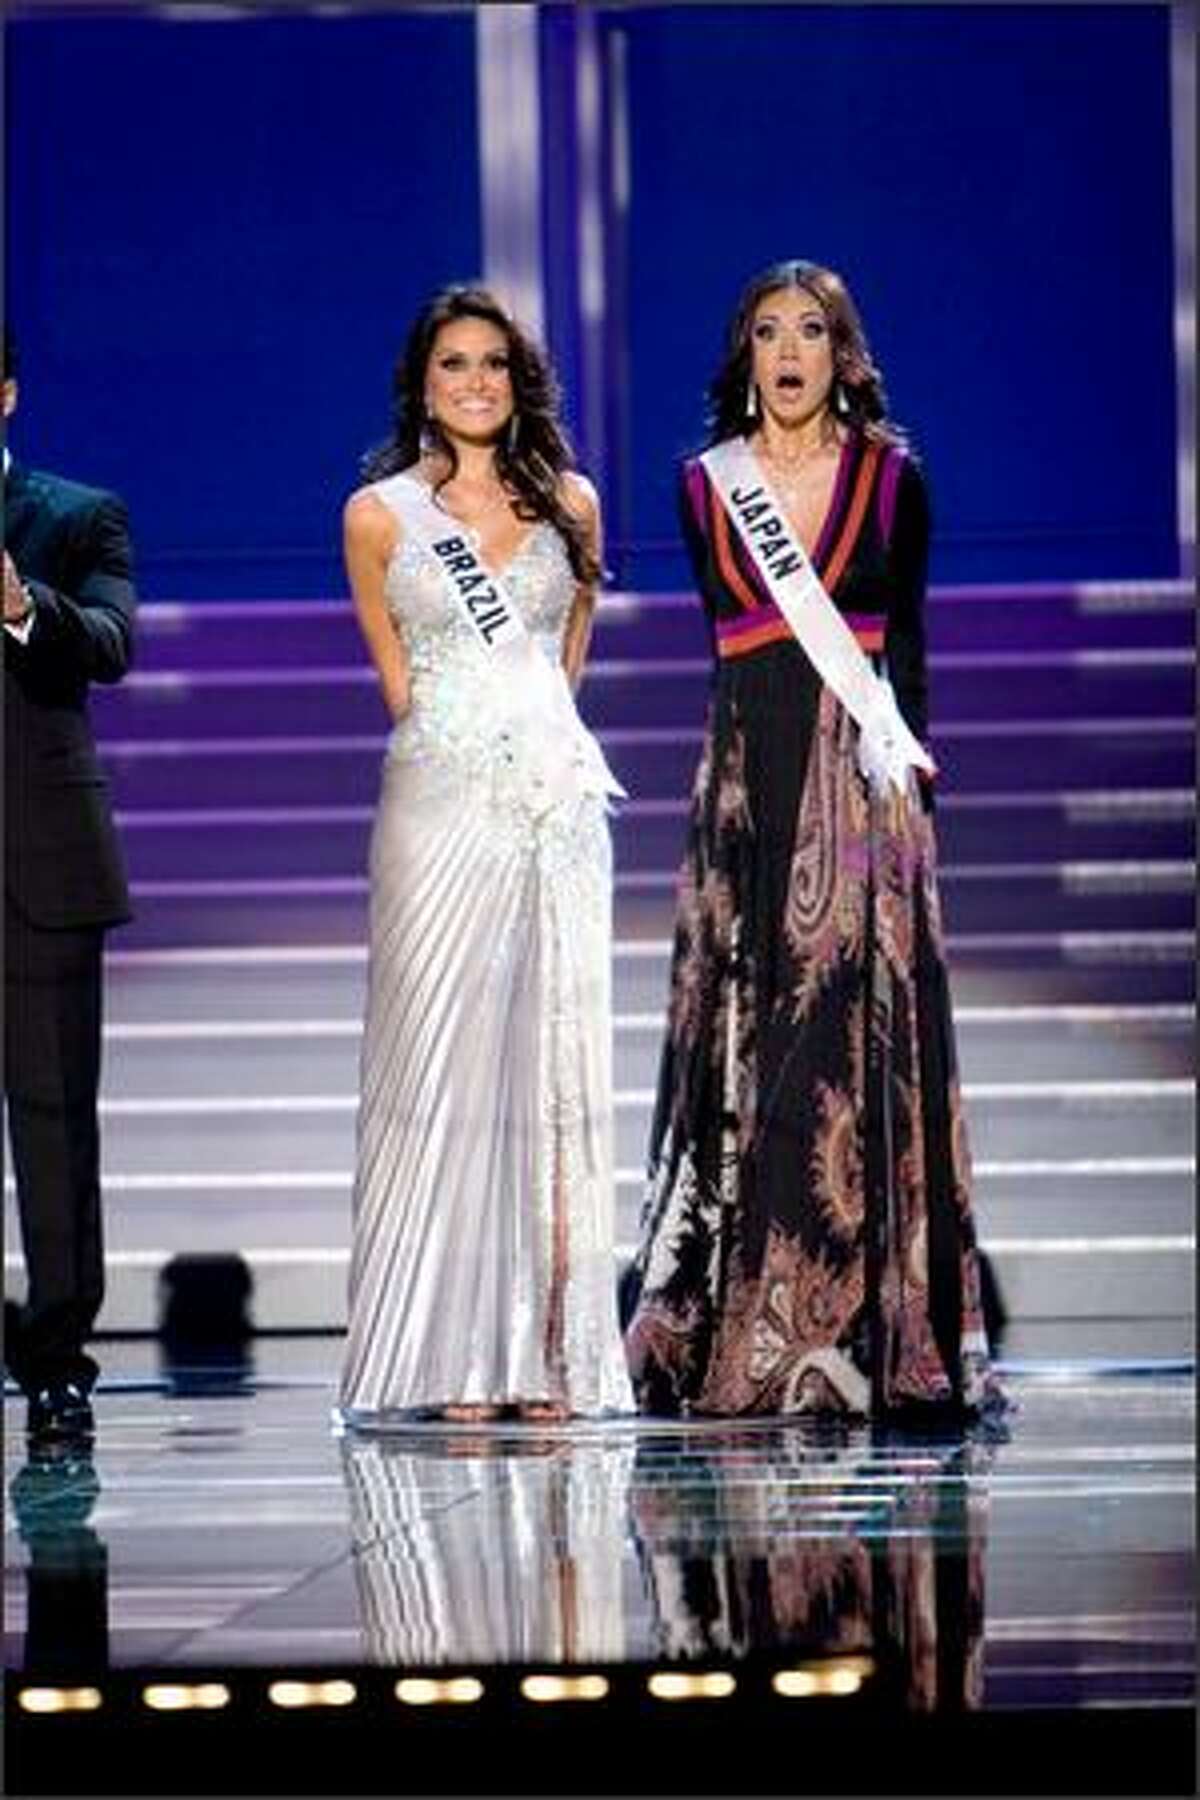 Miss Japan Riyo Mori, right, reacts as she is named Miss Universe 2007. First runner-up Natalia Guimaraes of Brazil is at left.